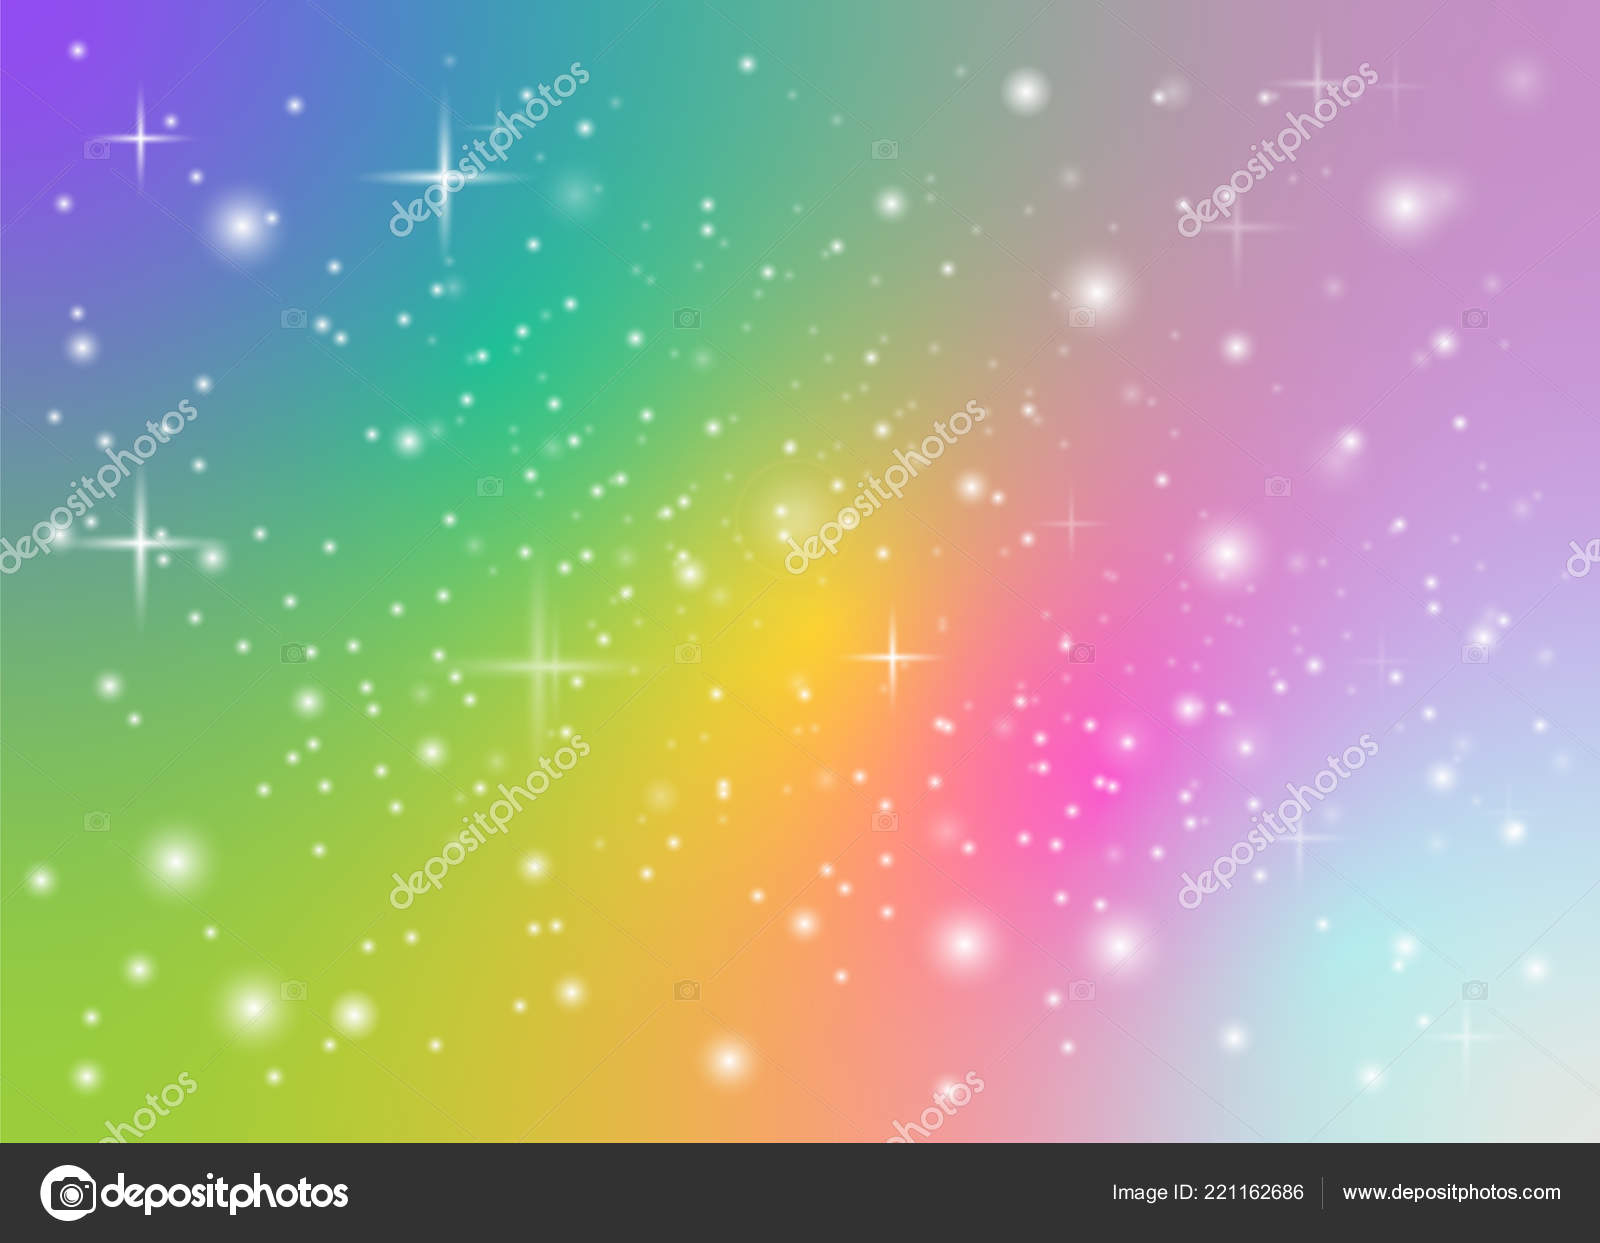 Featured image of post Rainbow Pastel Backround / Rainbow pastel backgrounds rainbow backgrounds rainbow pastel pastel backgrounds background colorful vector background abstract decoration backdrop color bright decorative artistic.